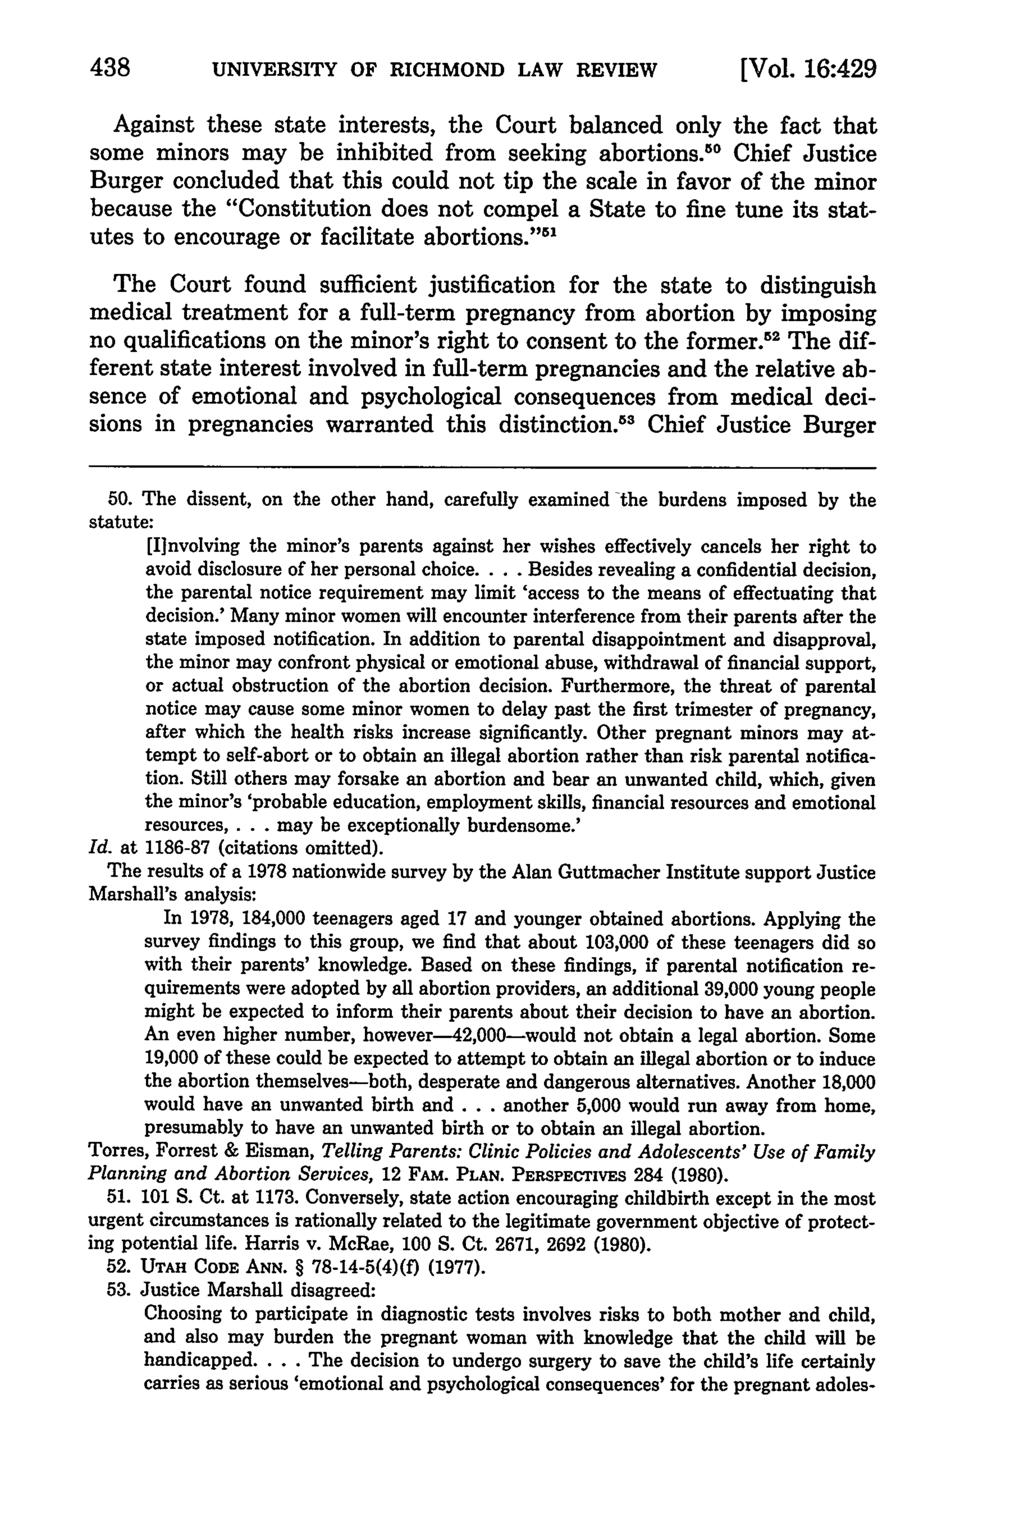 UNIVERSITY OF RICHMOND LAW REVIEW [Vol. 16:429 Against these state interests, the Court balanced only the fact that some minors may be inhibited from seeking abortions.